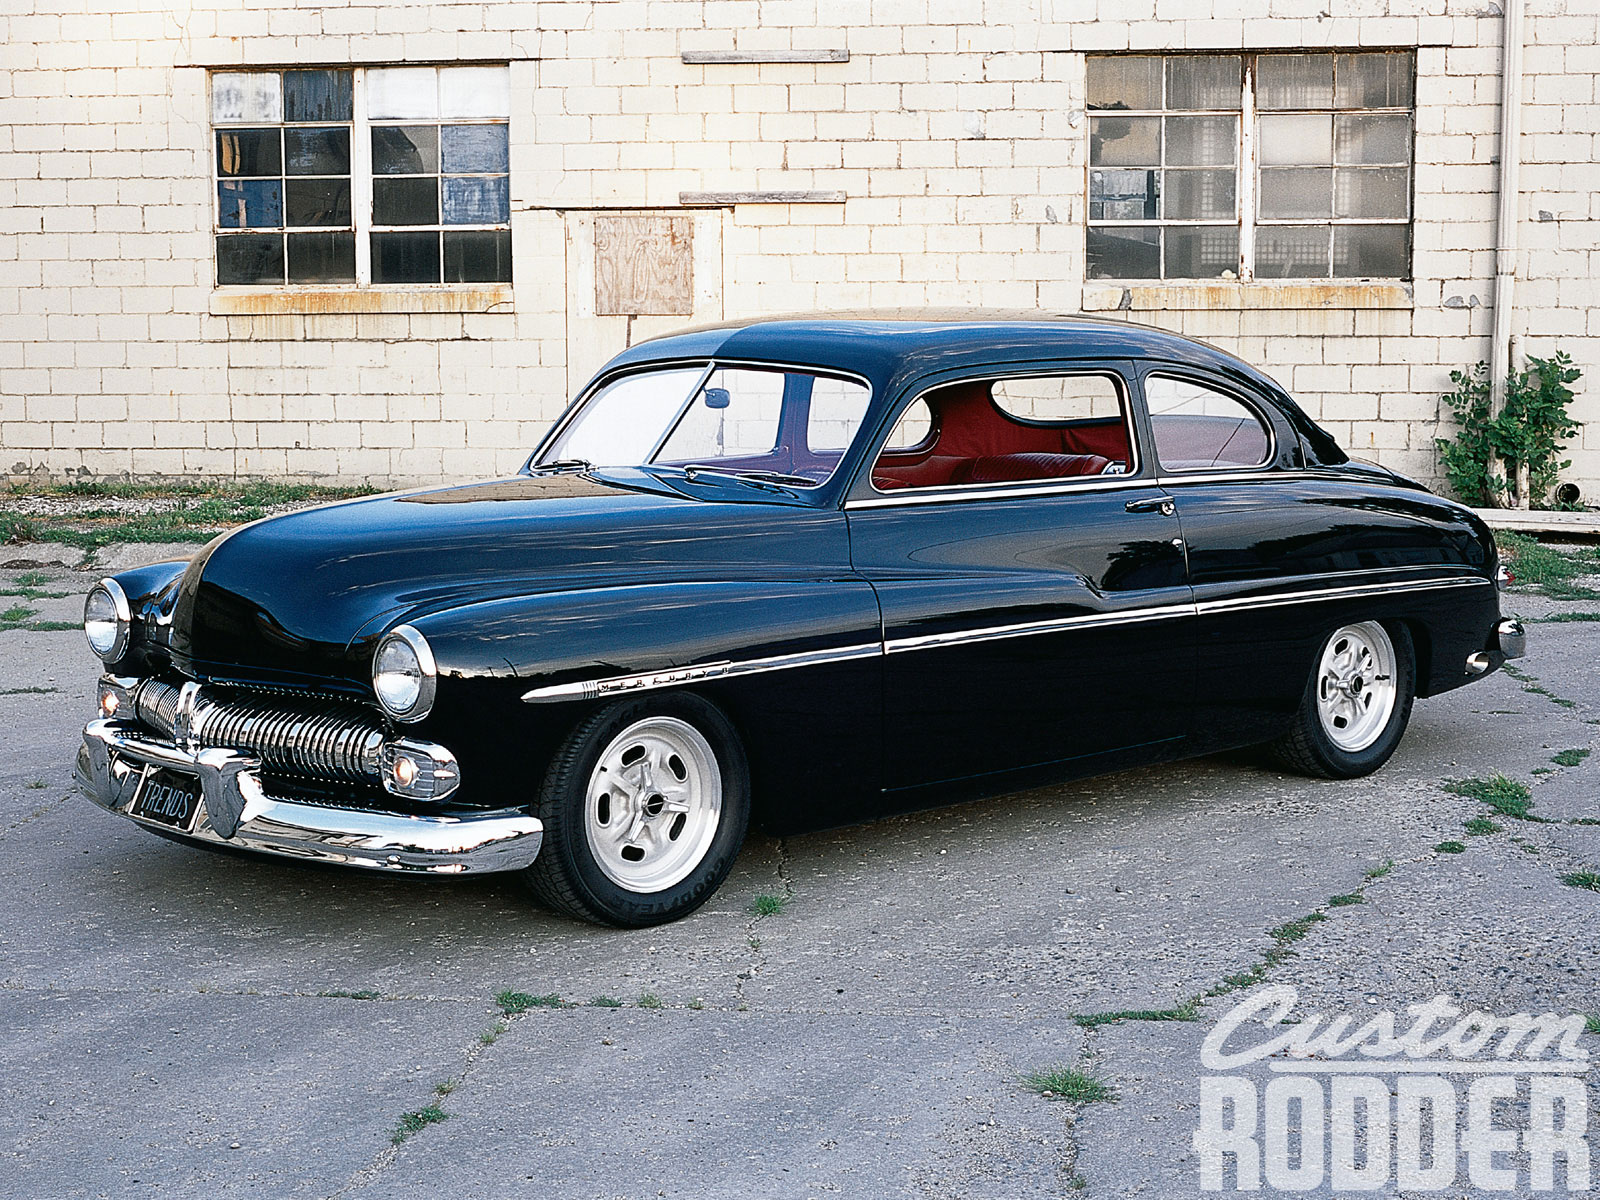 HQ 1950 Mercury Coupe Wallpapers | File 633.55Kb